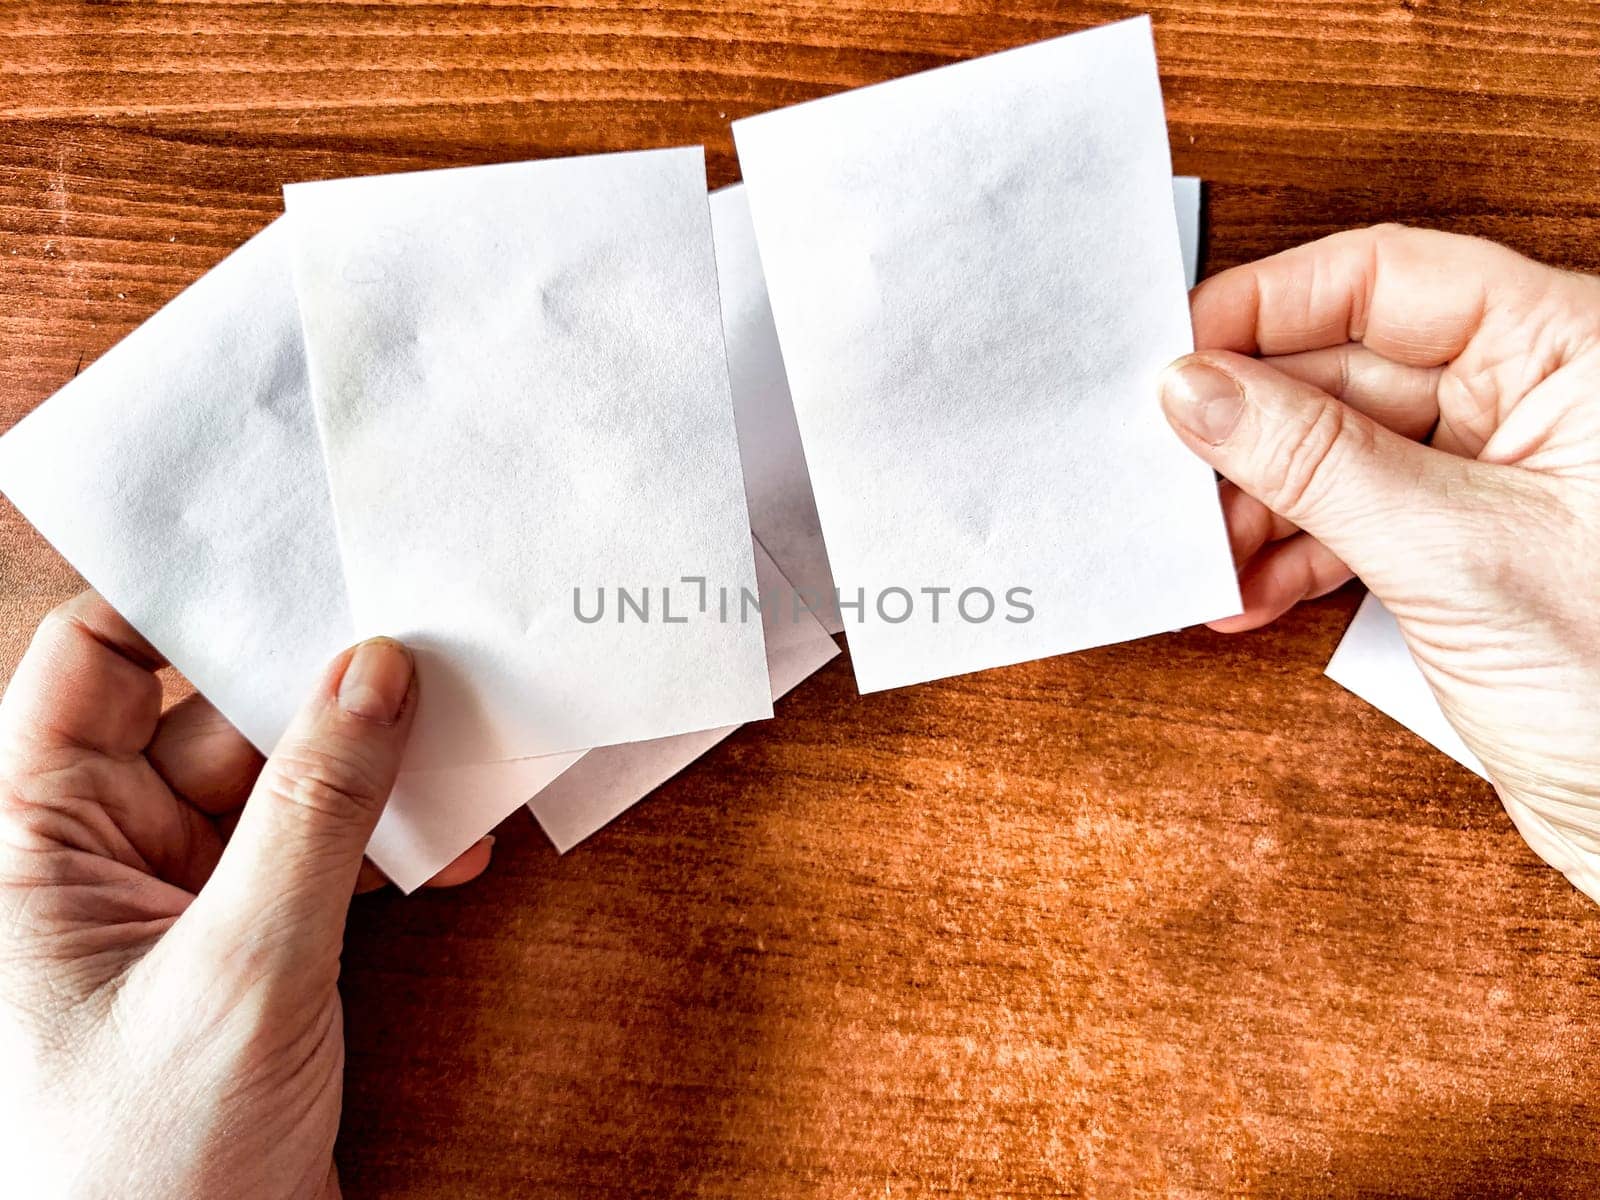 Woman Holding Small White Papers Over a Wooden Surface. Hands presenting several small white papers by keleny